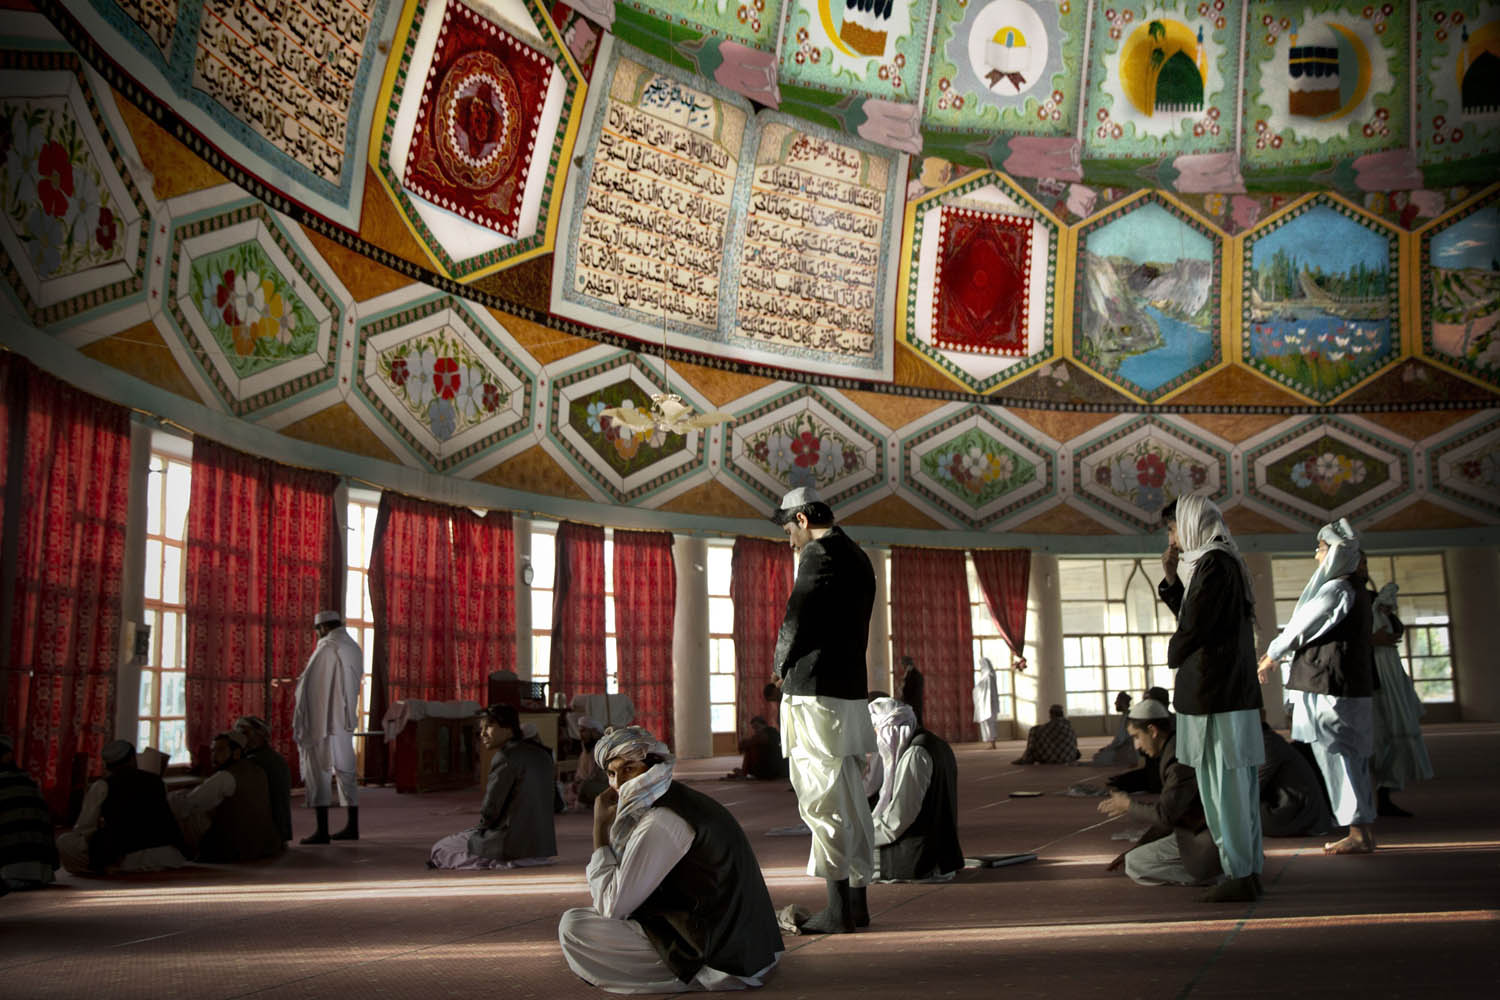 Oct. 30, 2013. Afghan men gather for prayers inside the Eid Gah mosque, one of Afghanistan's largest mosques in Kandahar, southern Afghanistan.